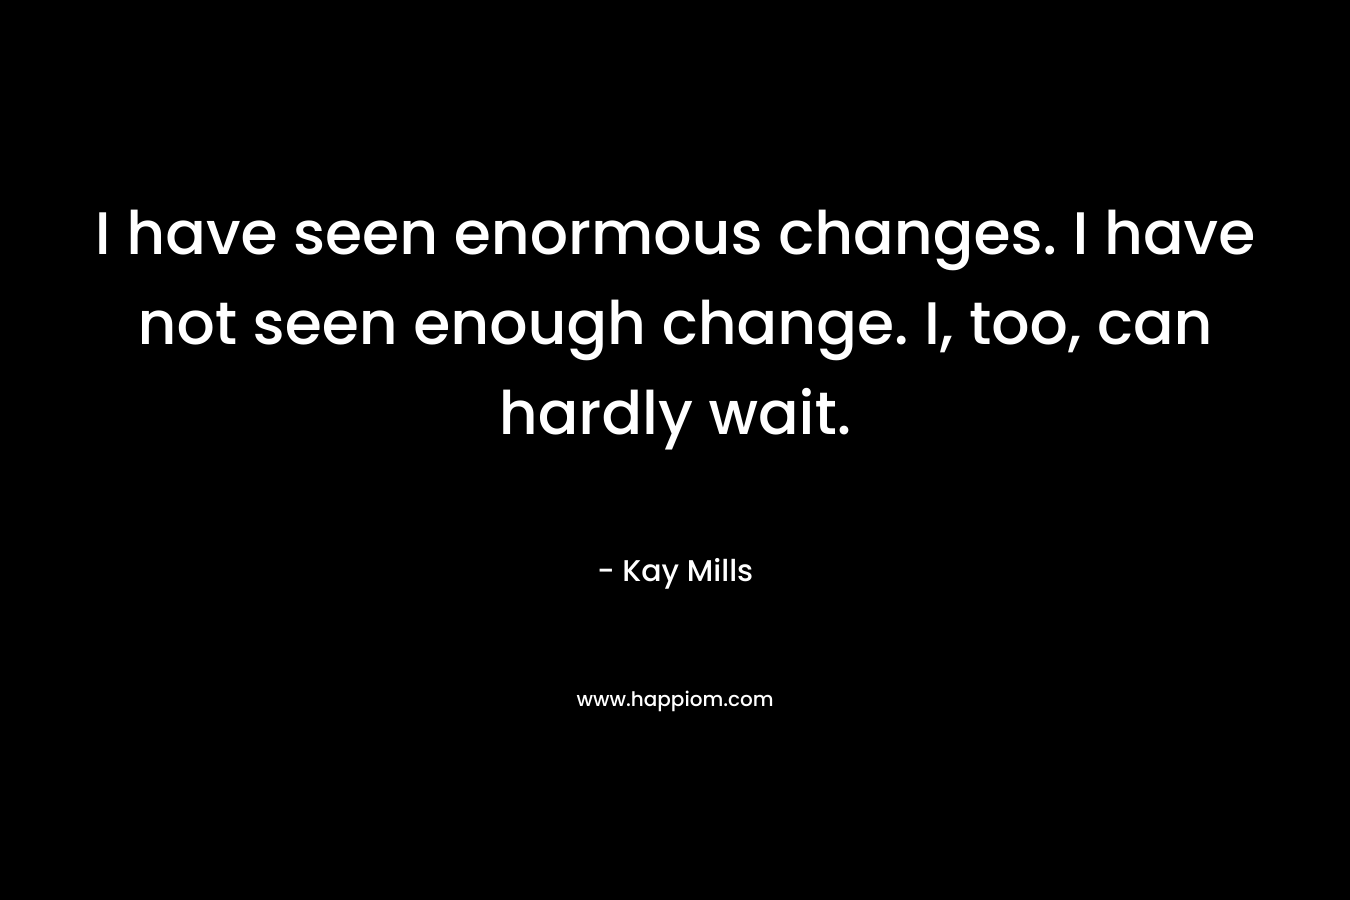 I have seen enormous changes. I have not seen enough change. I, too, can hardly wait.